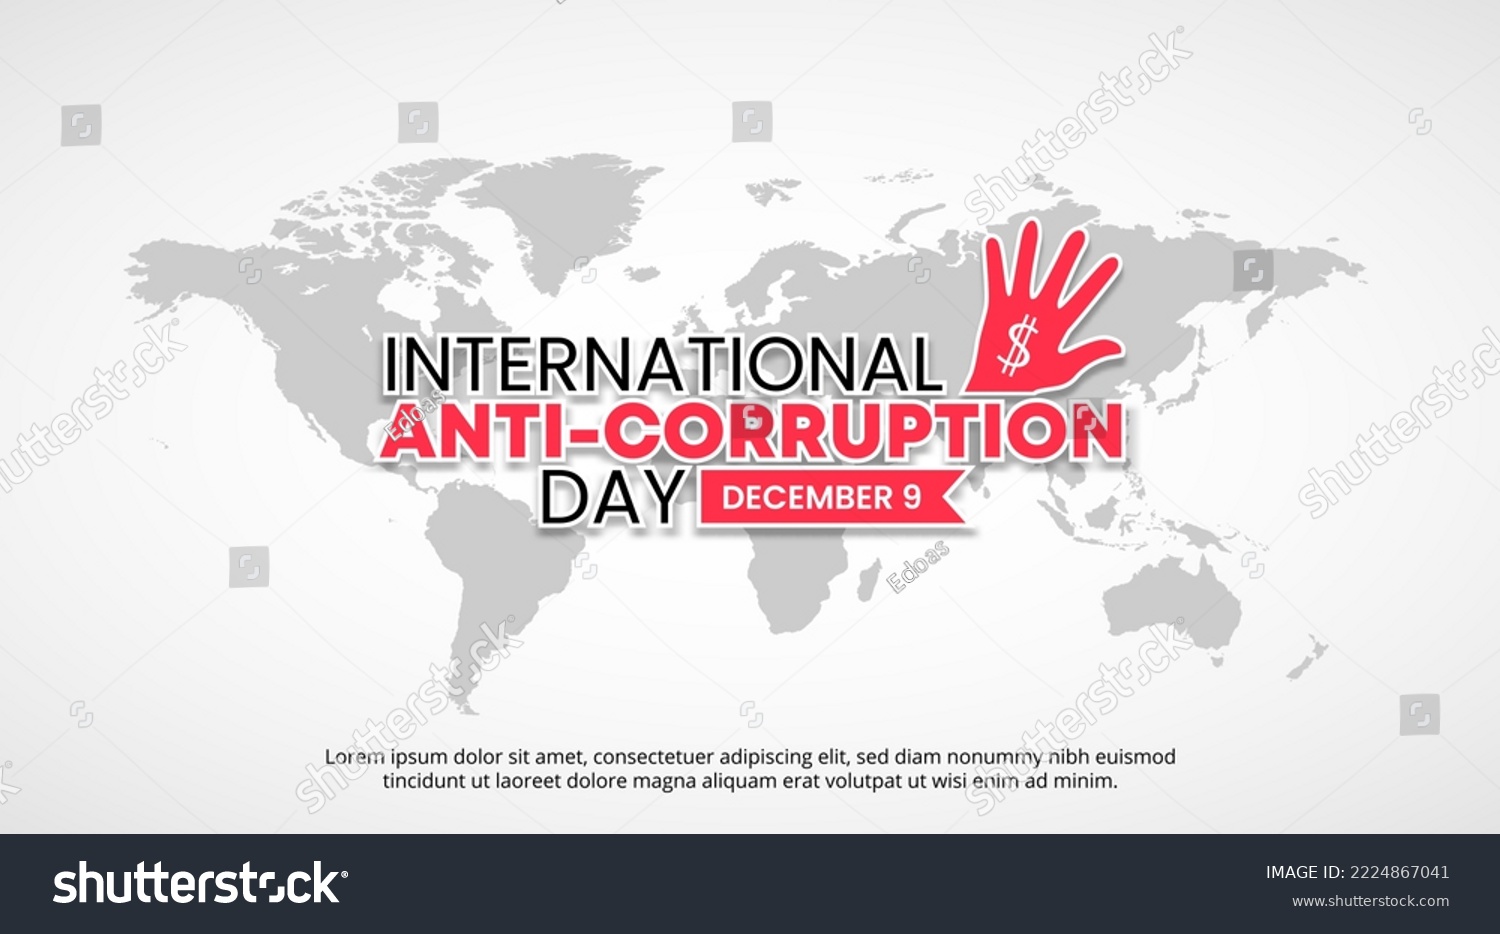 SVG of International anti corruption day background with a world map and rejecting hand svg